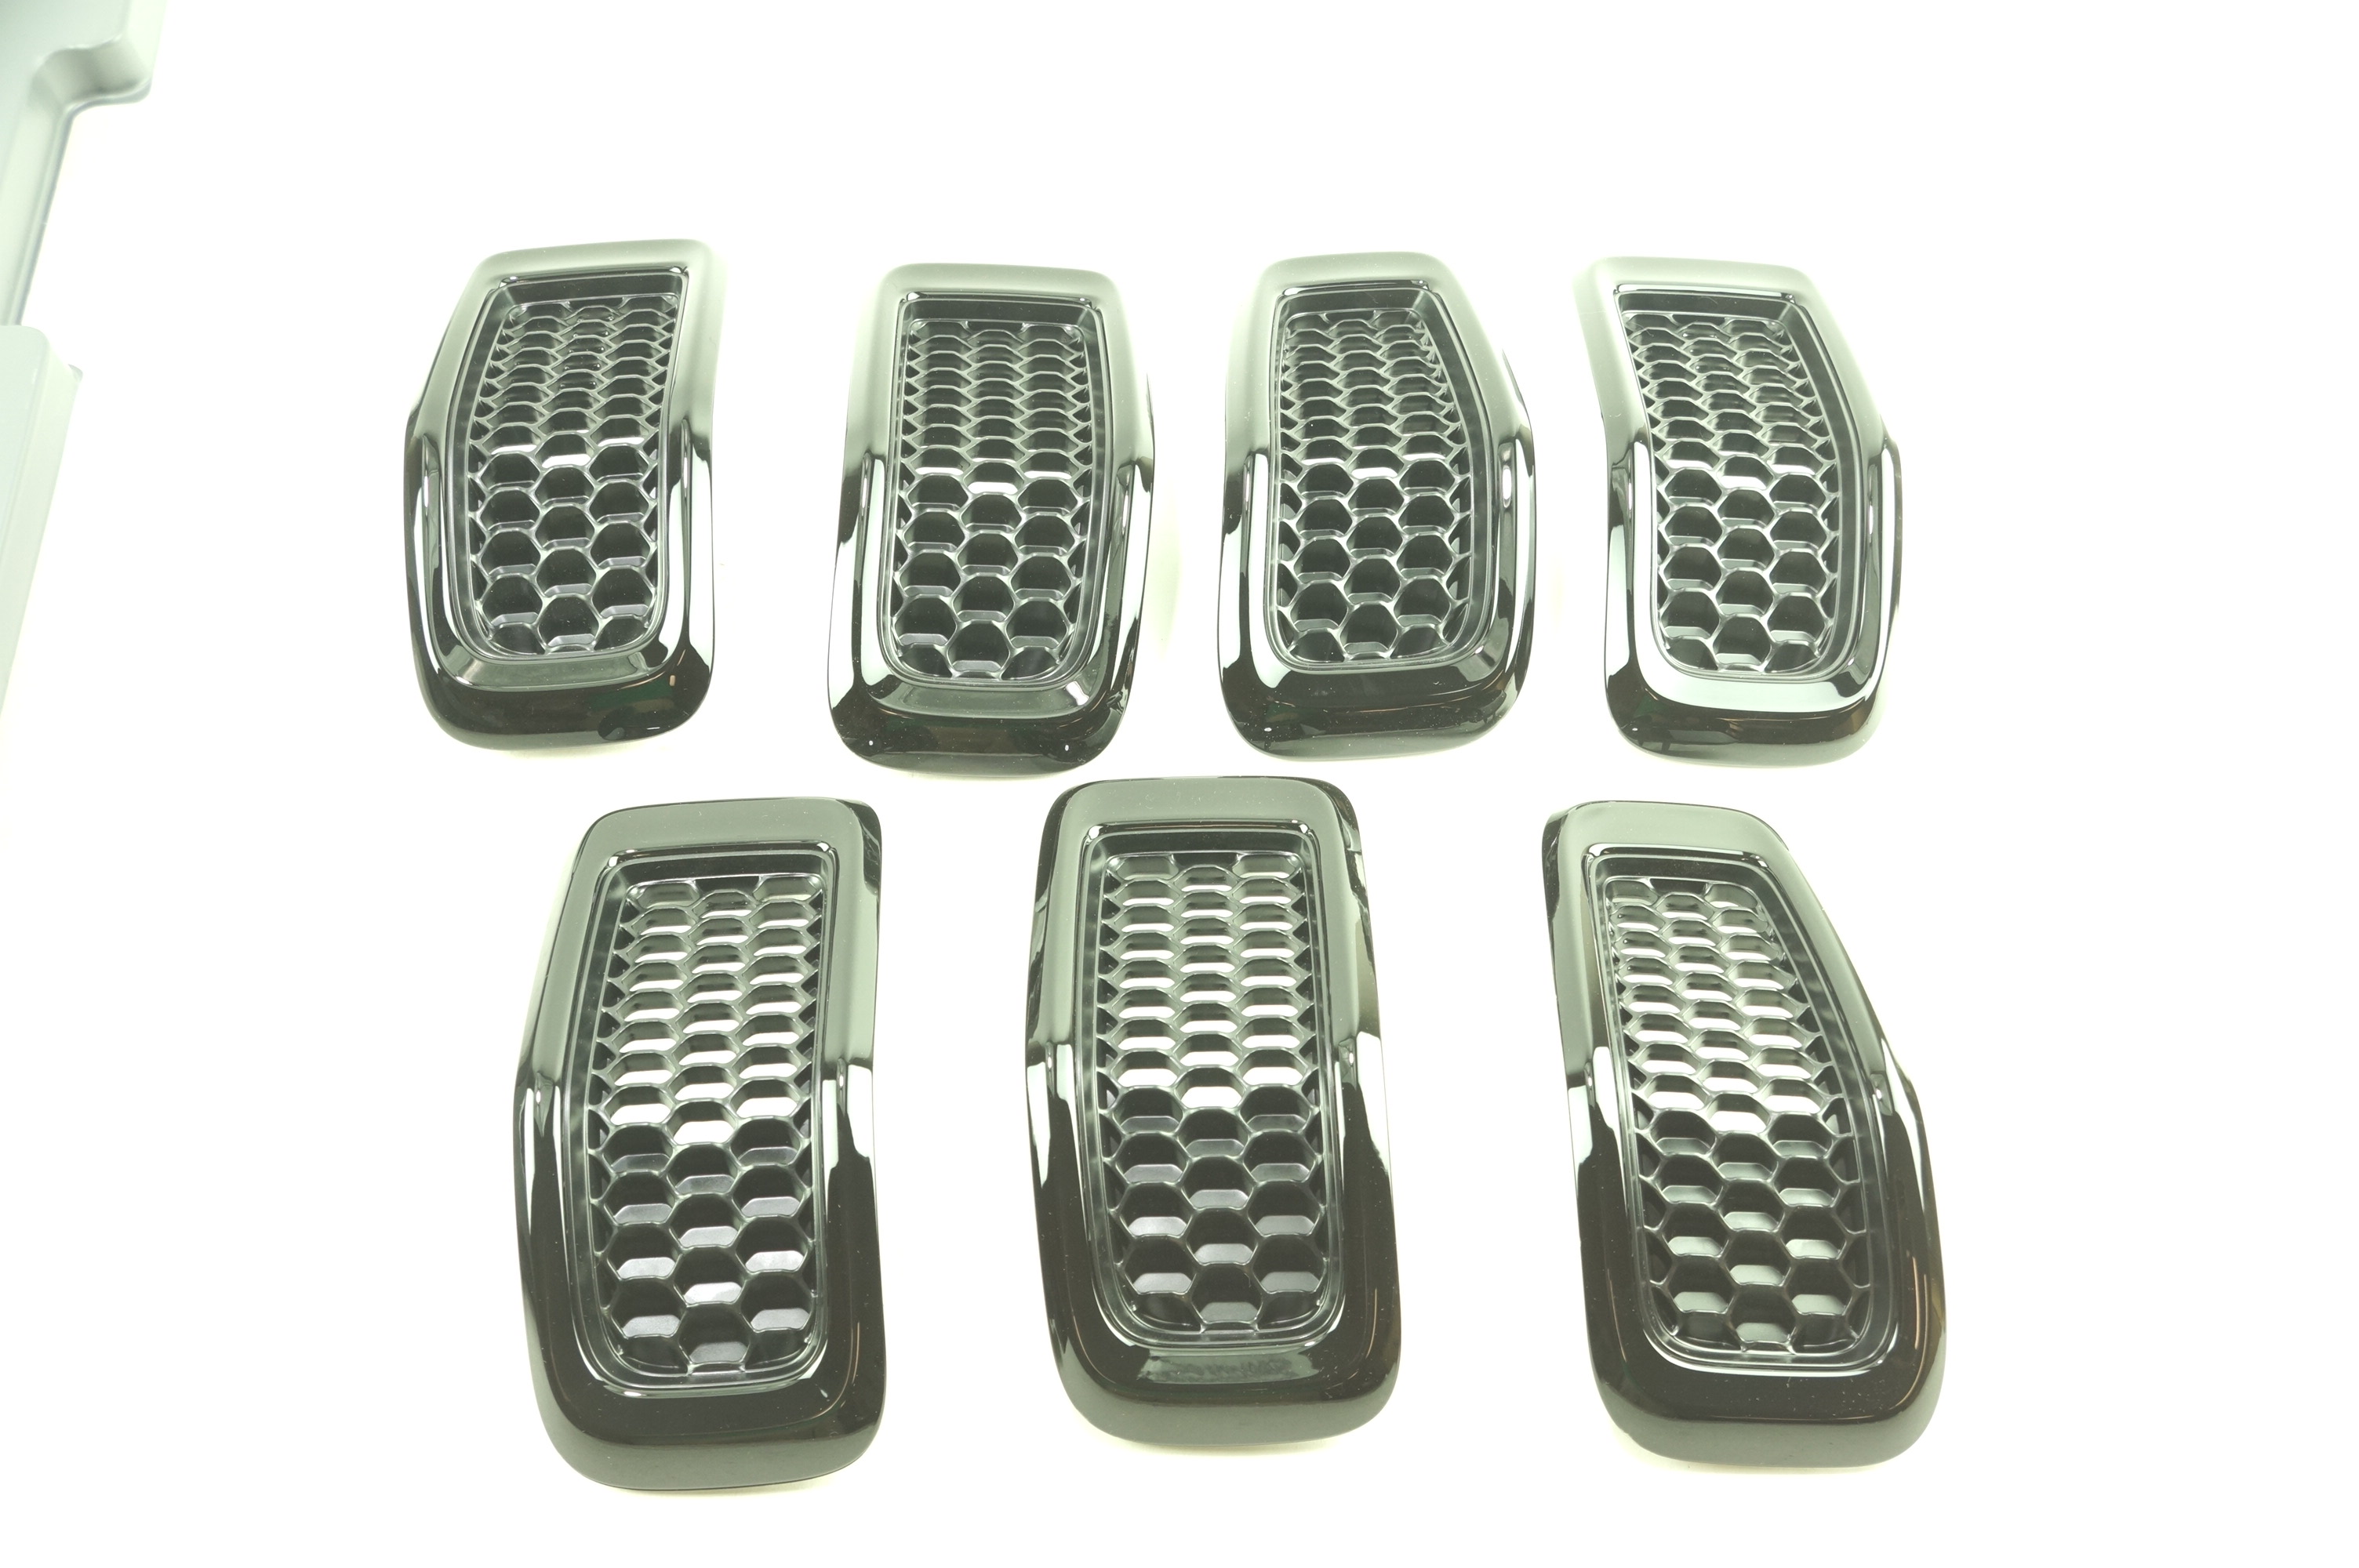 New OEM 6CY39DX8-AC Mopar 14-18 Jeep Cherokee Gloss Black Front Grille Inserts - image 1